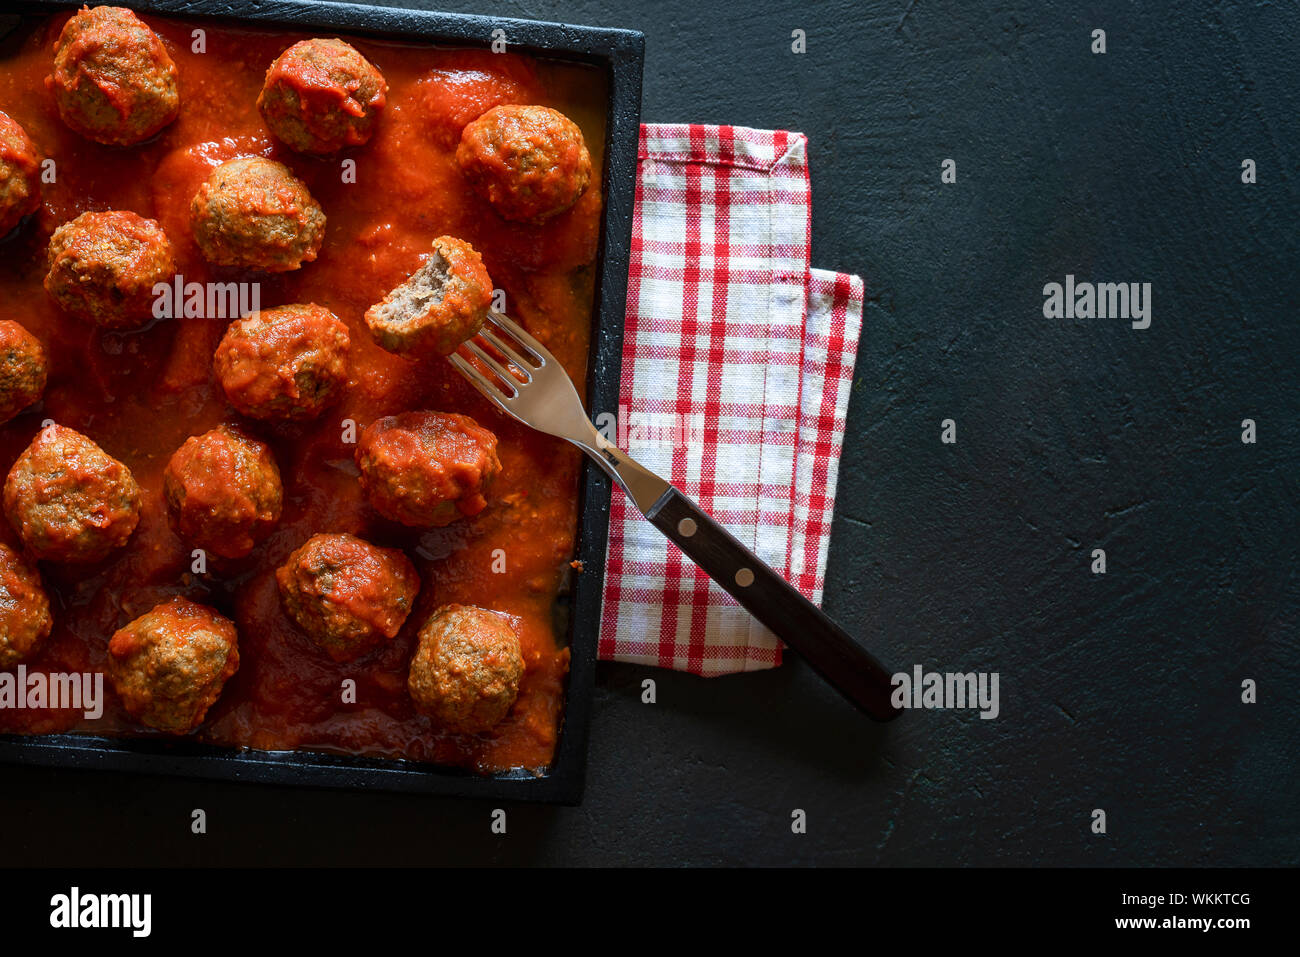 Tasty Swedish meatballs in hot spicy tomato dip on a black plate and black table. Above view of a plate of meatballs and a fork with bitten food. Stock Photo